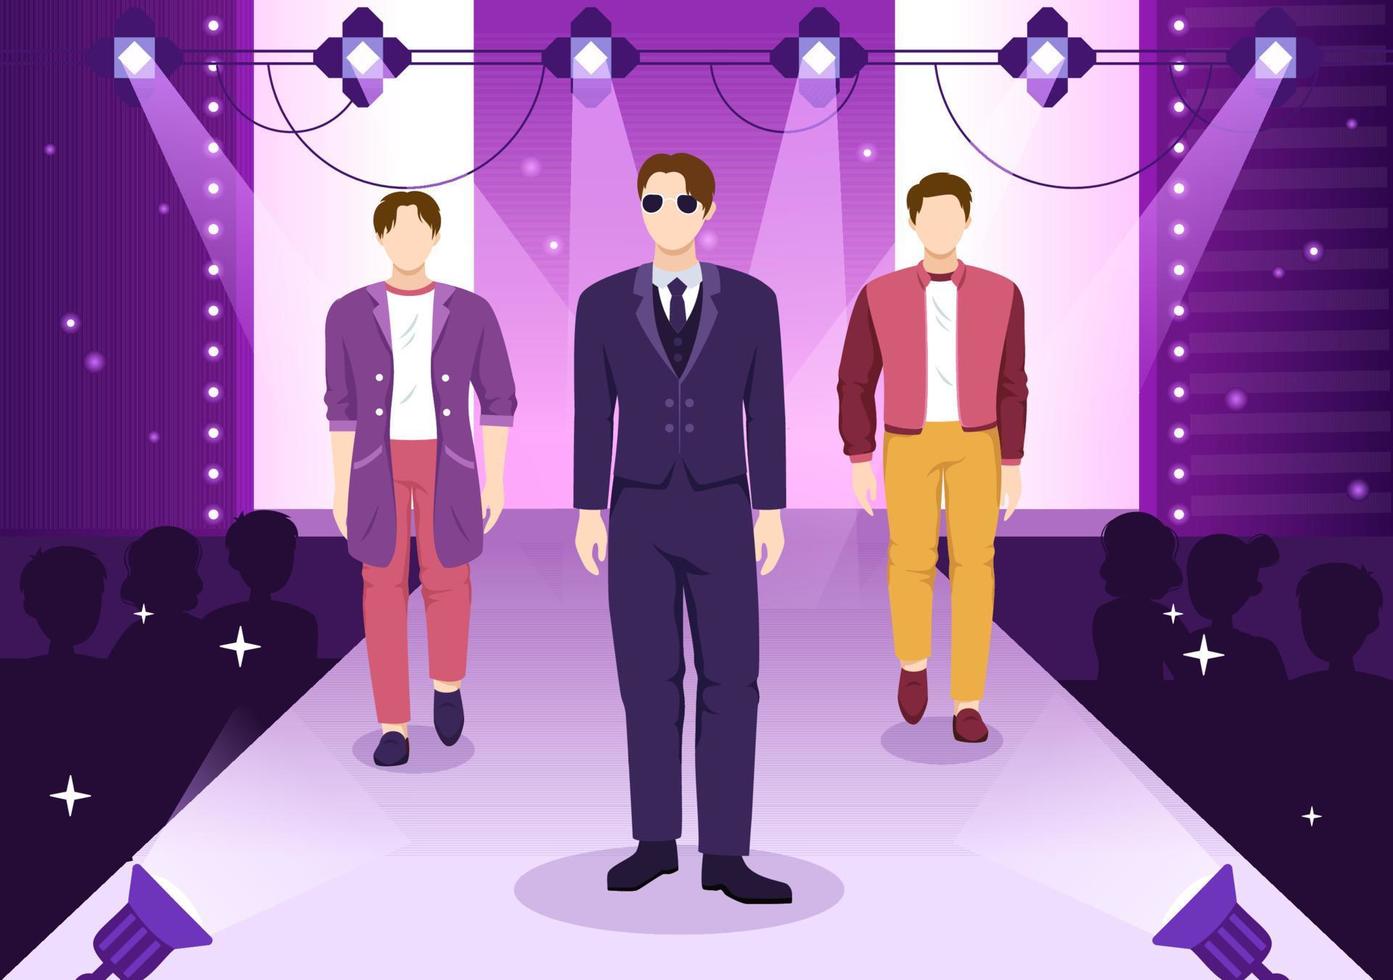 Fashion Men Show with Catwalk Male Models Display Clothes on Runway in Modern Trendy Outfits on Flat Cartoon Hand Drawn Templates Illustration vector